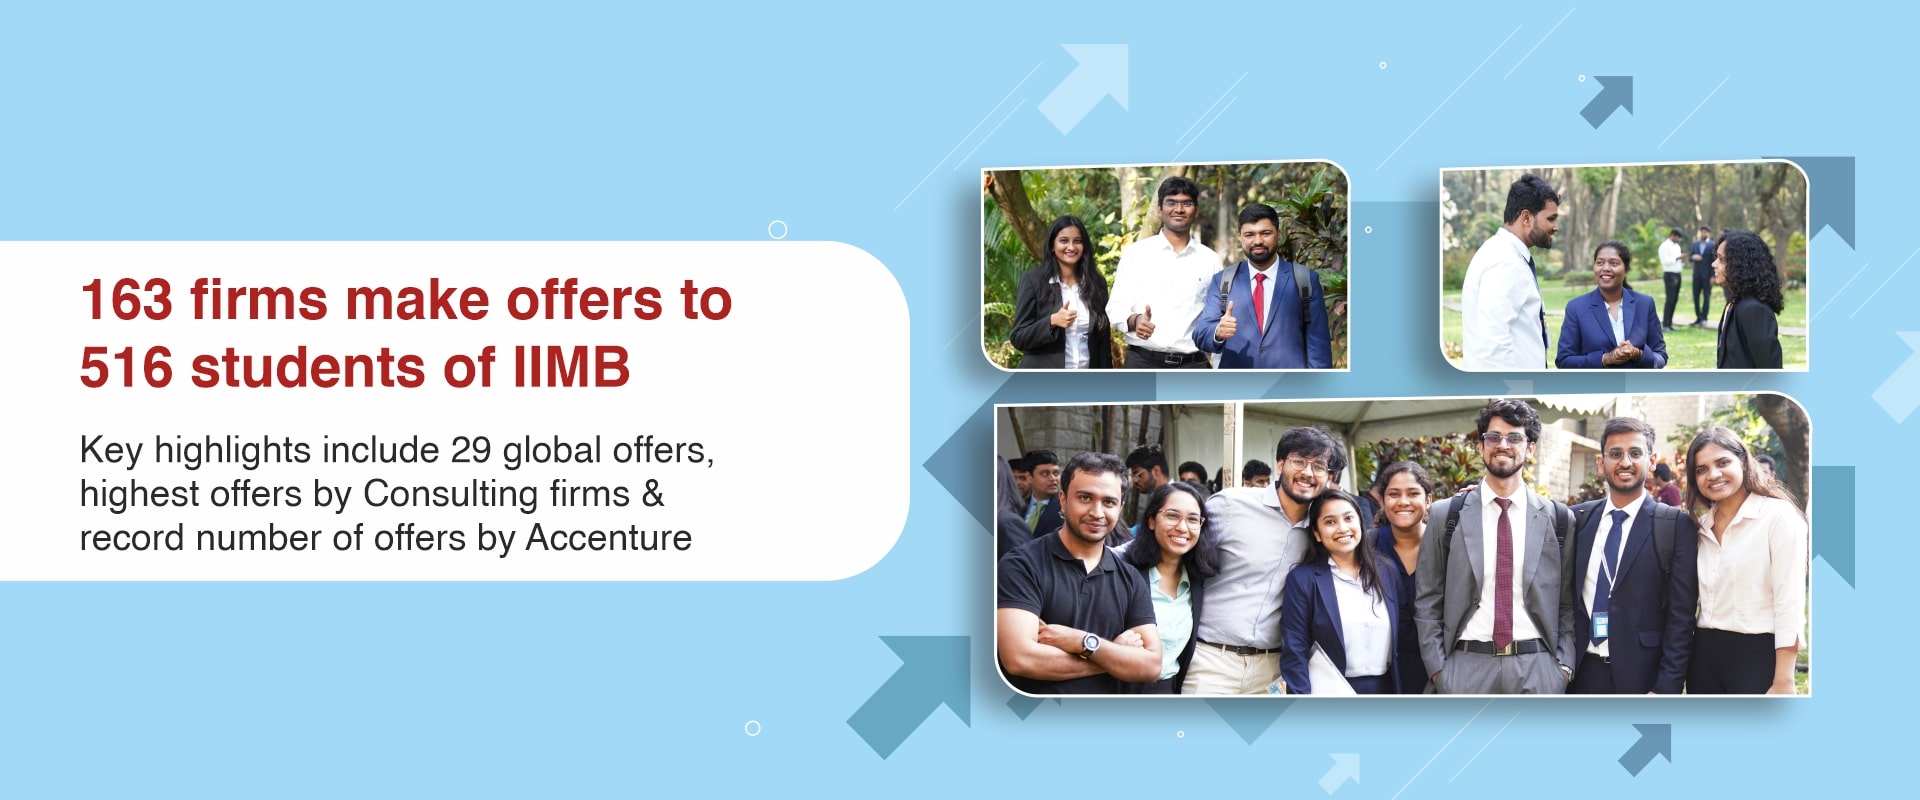 163 firms make offers to 516 students of IIMB